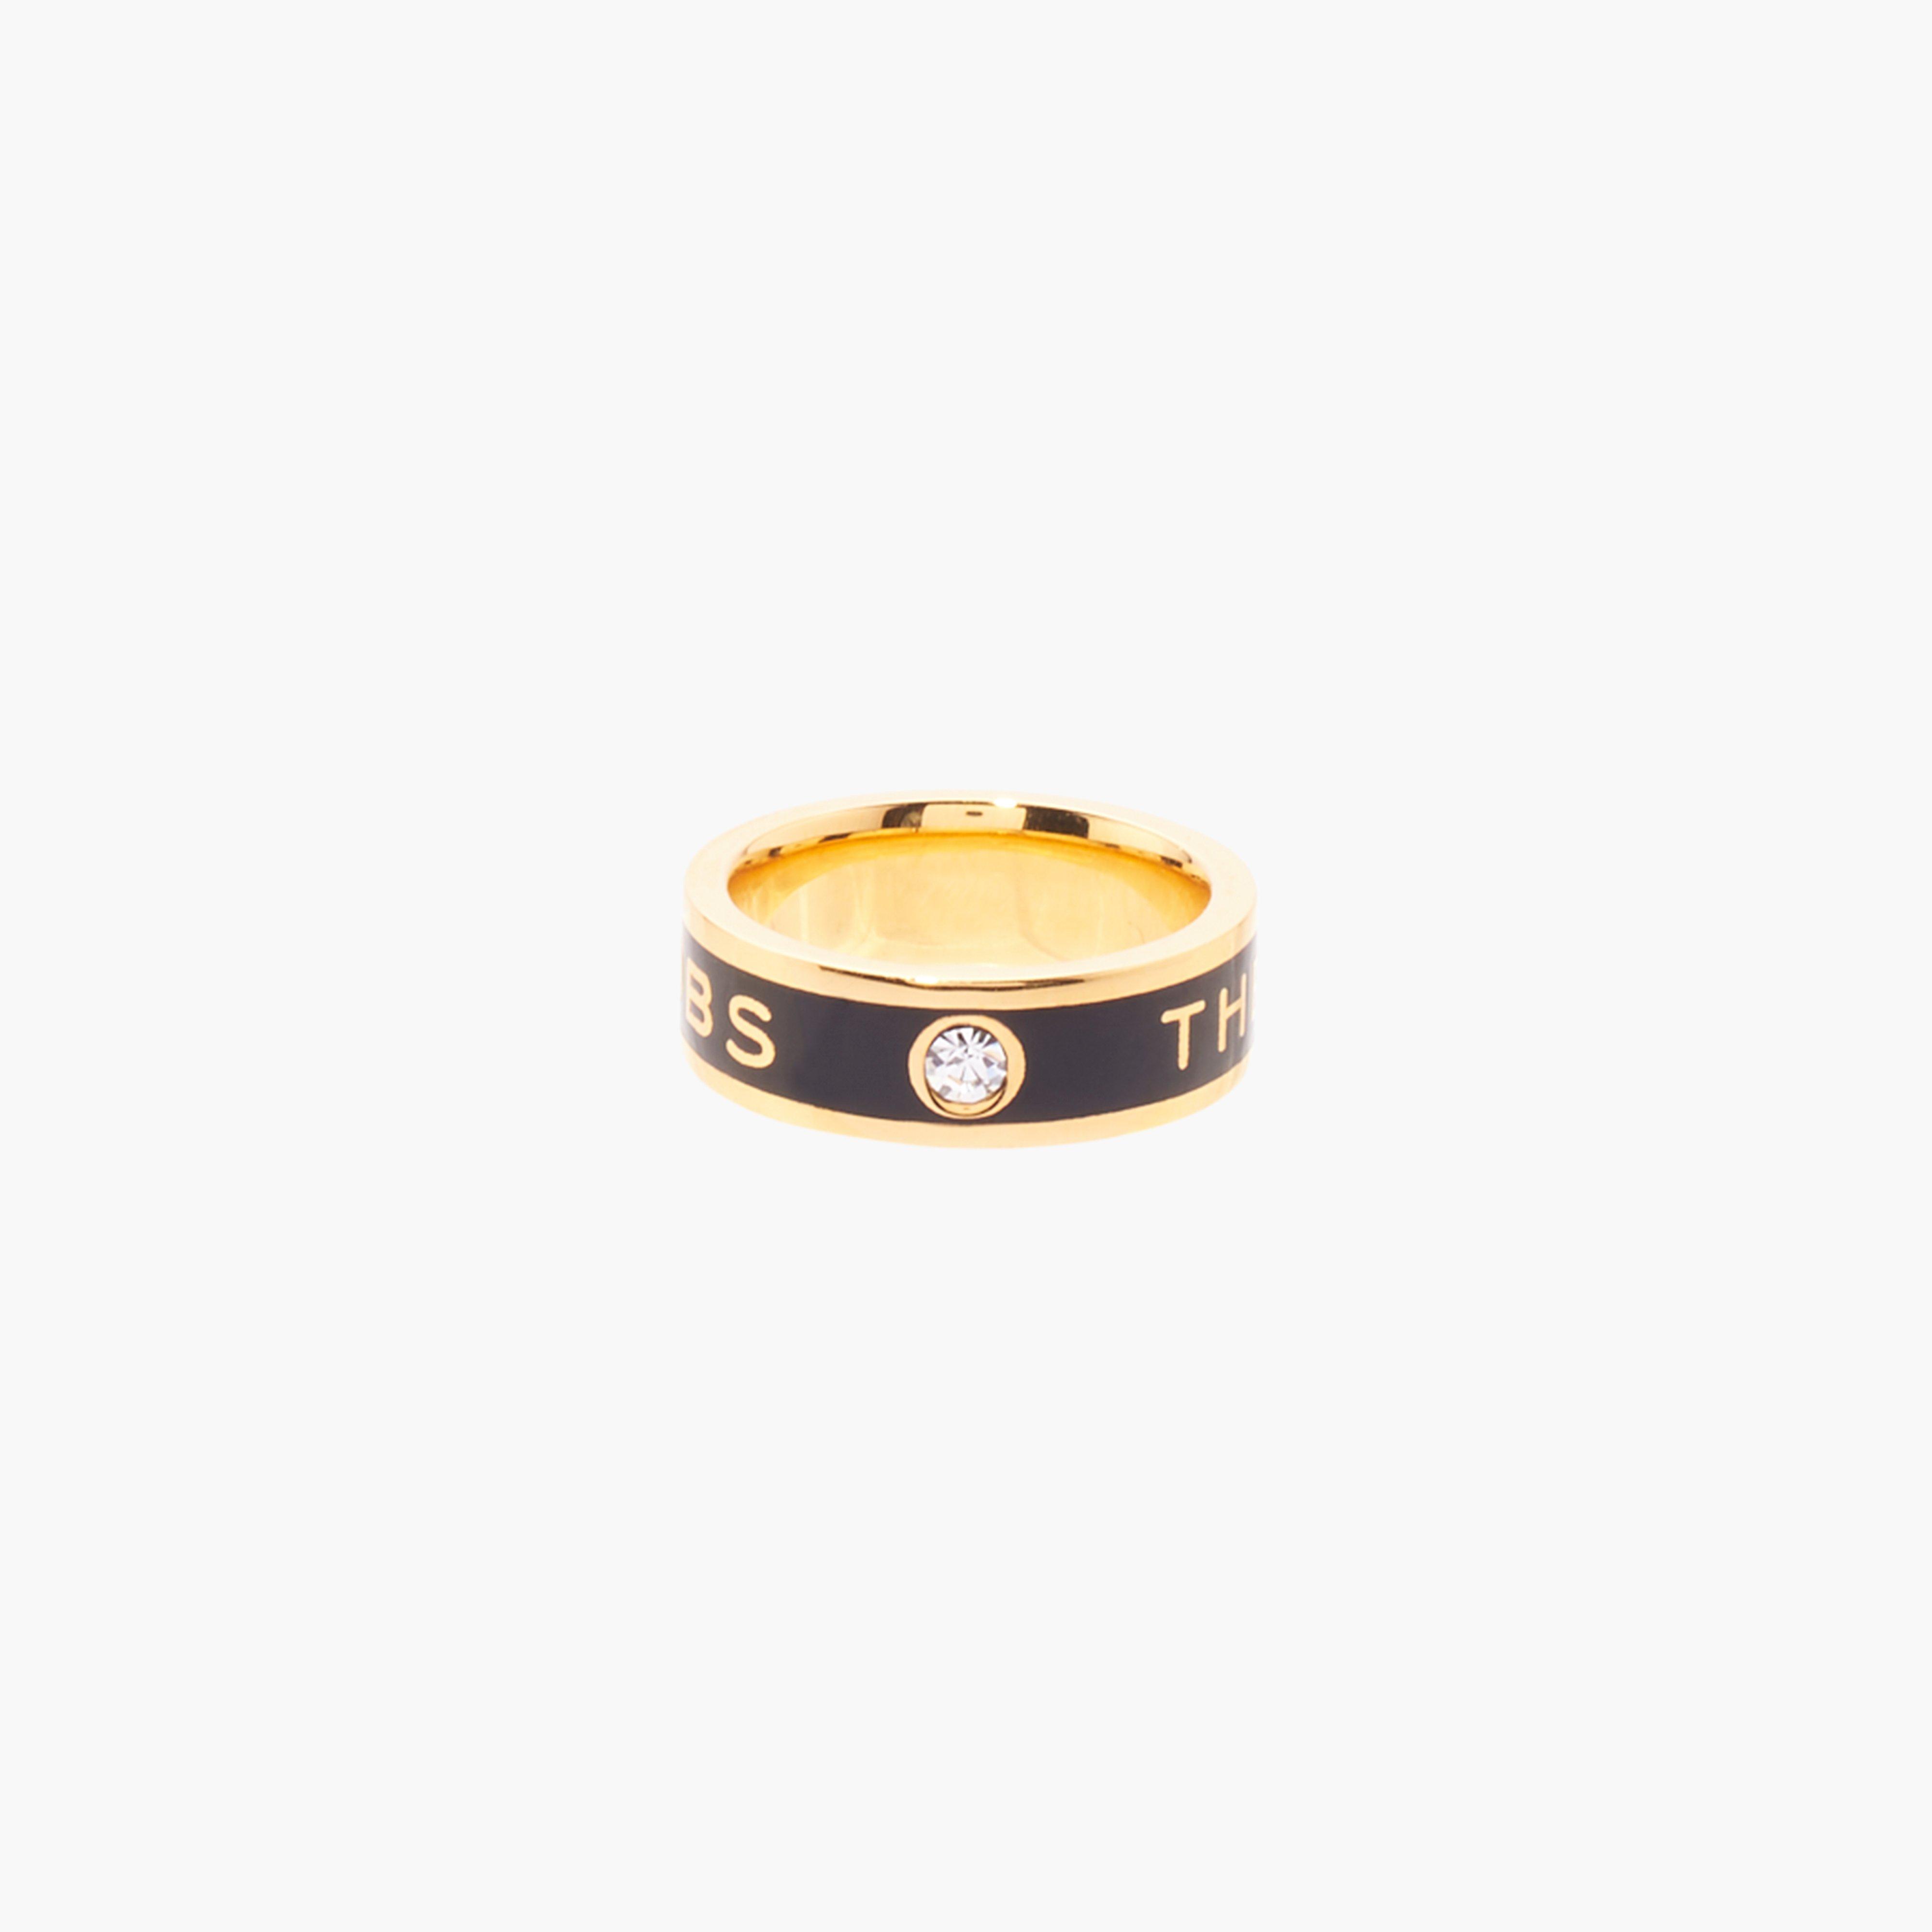 Marc by Marc jacobs The Medallion Ring,BLACK/GOLD